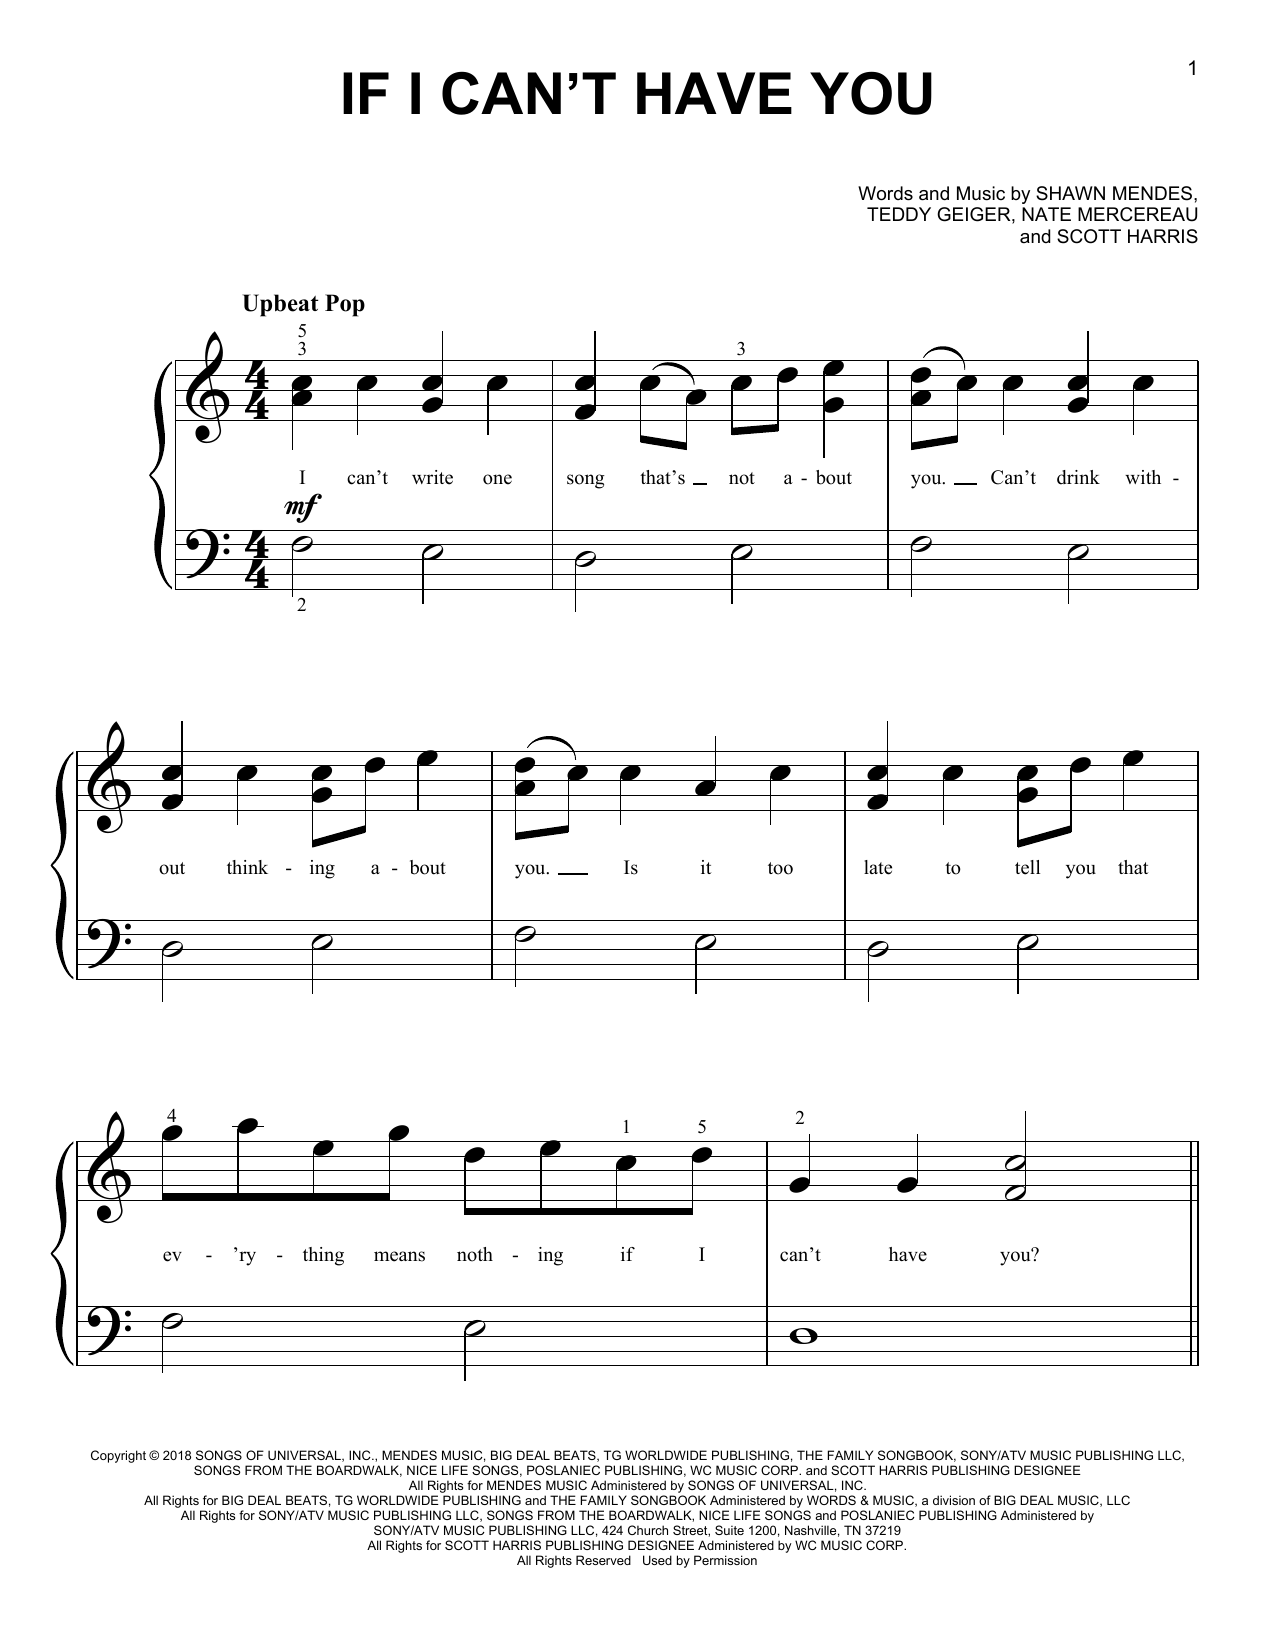 Download Shawn Mendes If I Can't Have You Sheet Music